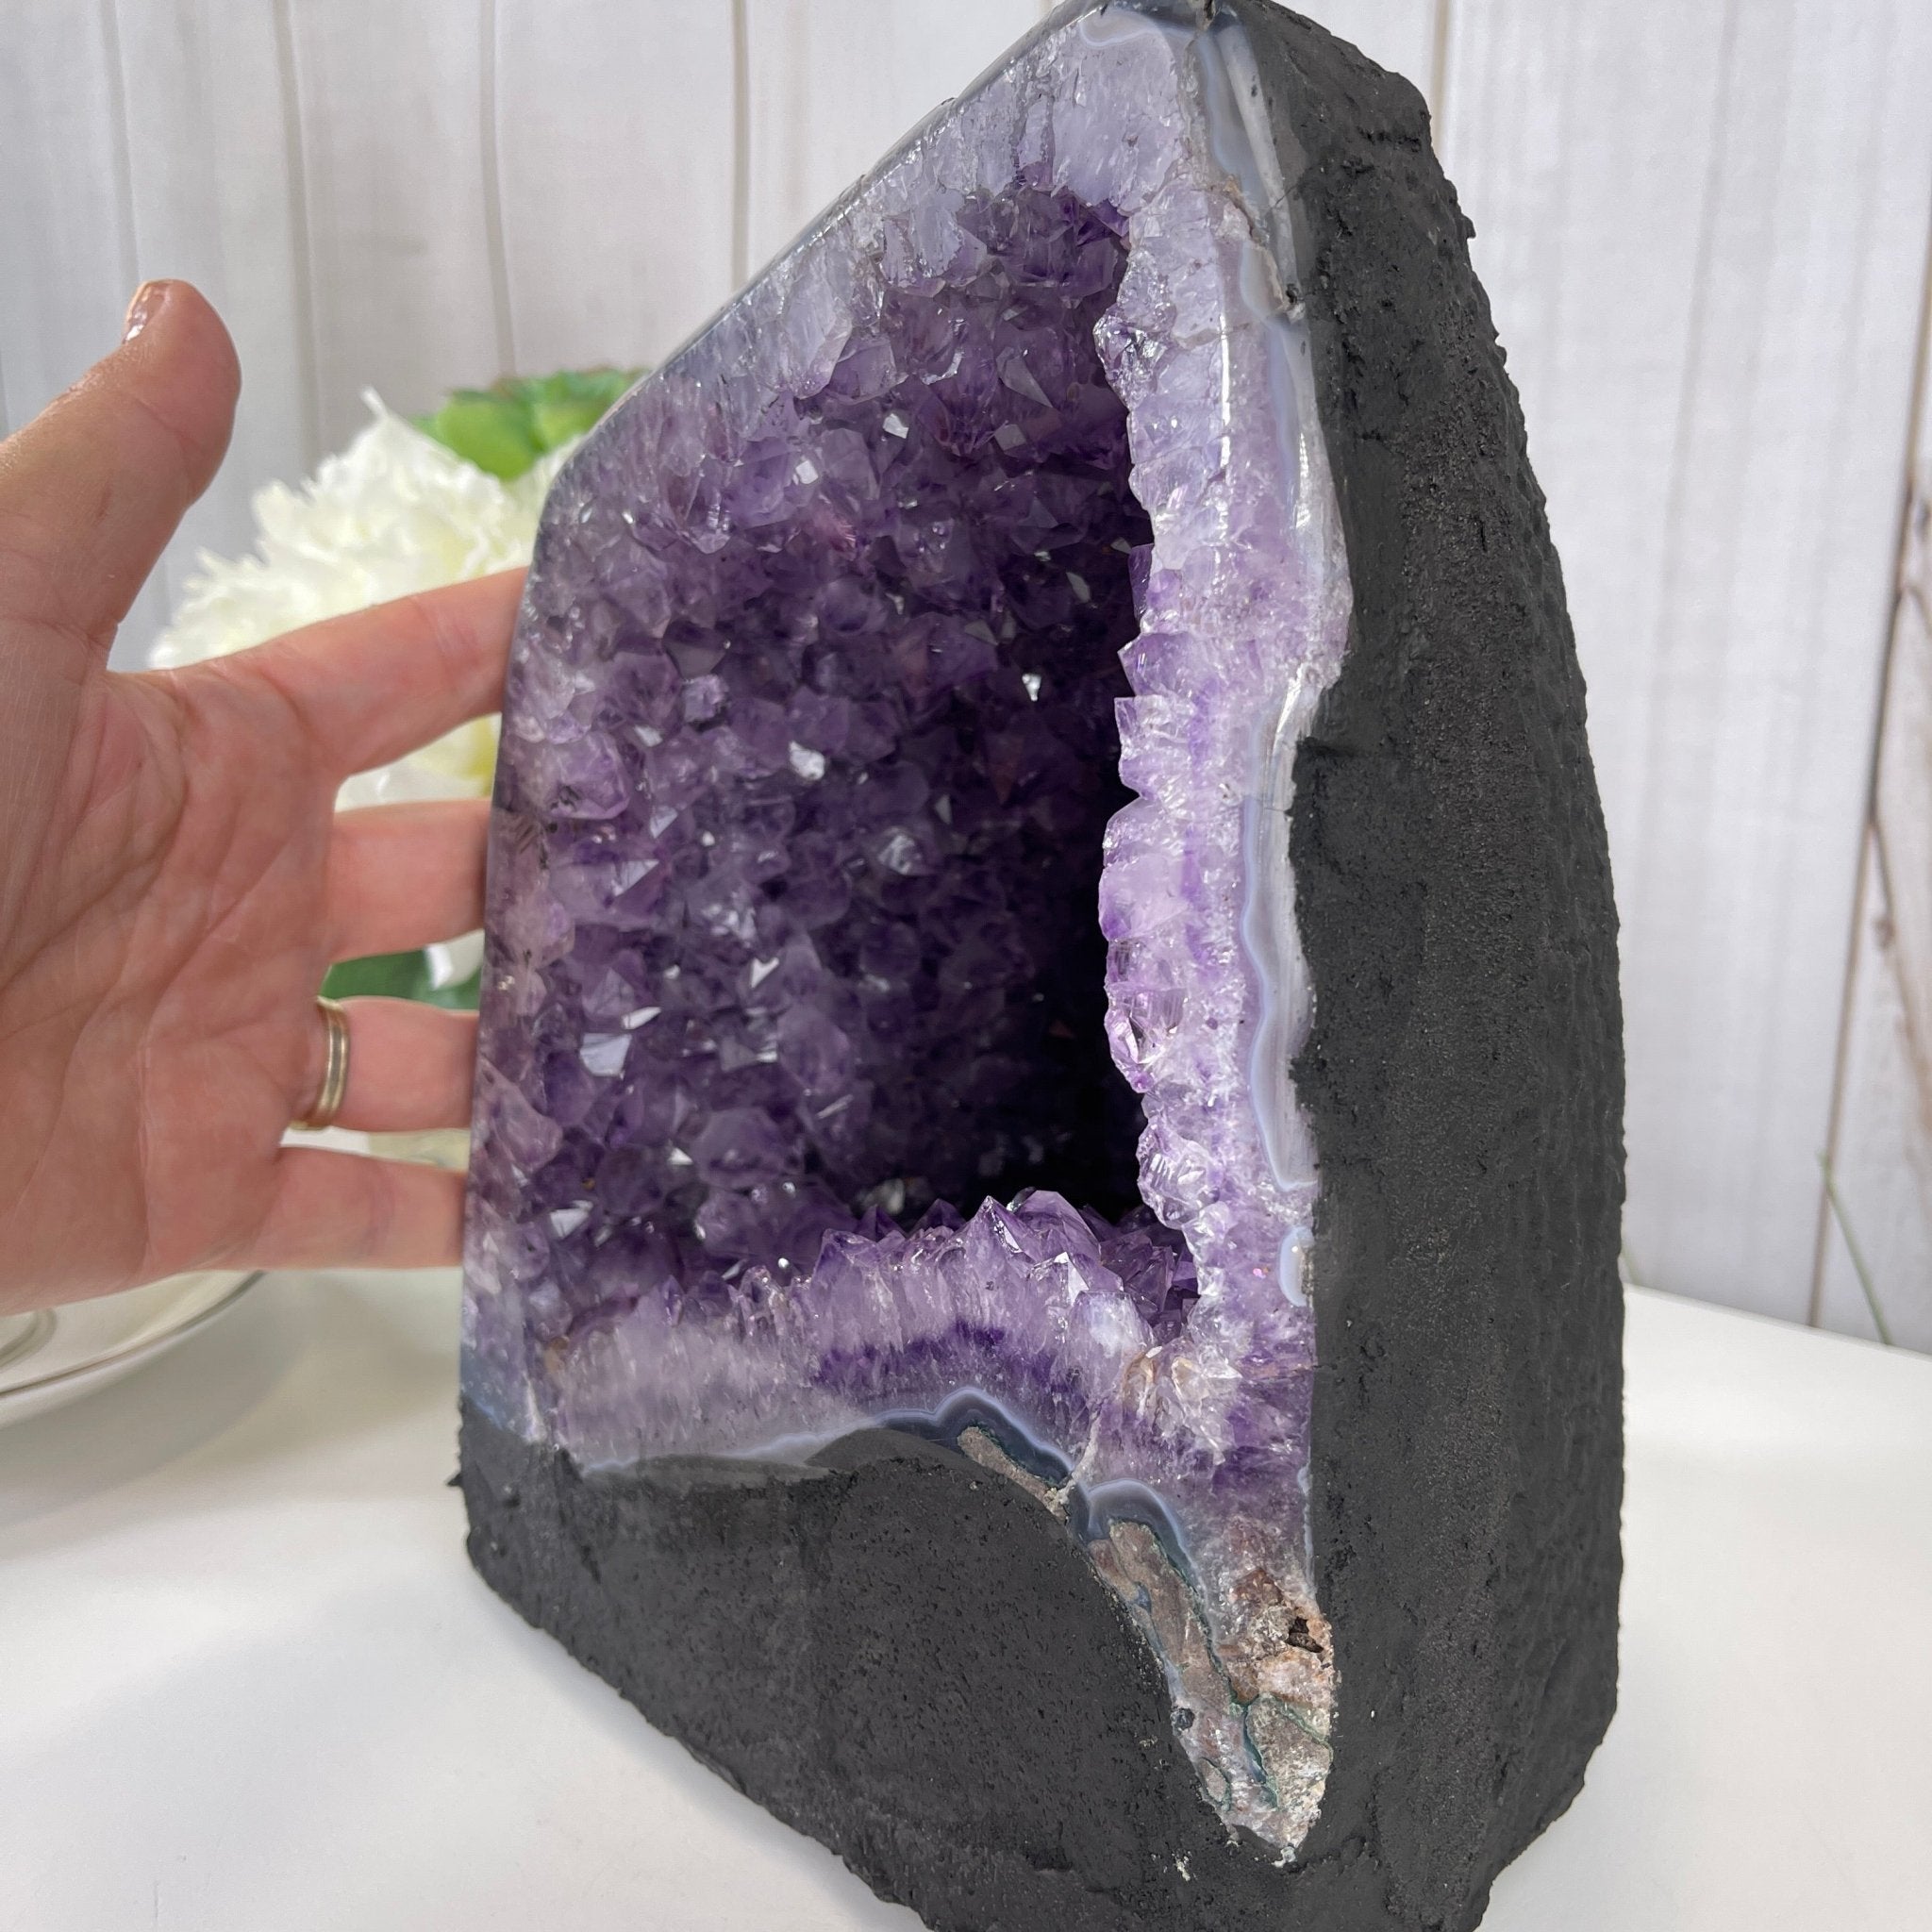 Extra Quality Brazilian Amethyst Cathedral, 9.5” tall & 14.4 lbs #5601-0461 by Brazil Gems - Brazil GemsBrazil GemsExtra Quality Brazilian Amethyst Cathedral, 9.5” tall & 14.4 lbs #5601-0461 by Brazil GemsCathedrals5601-0461